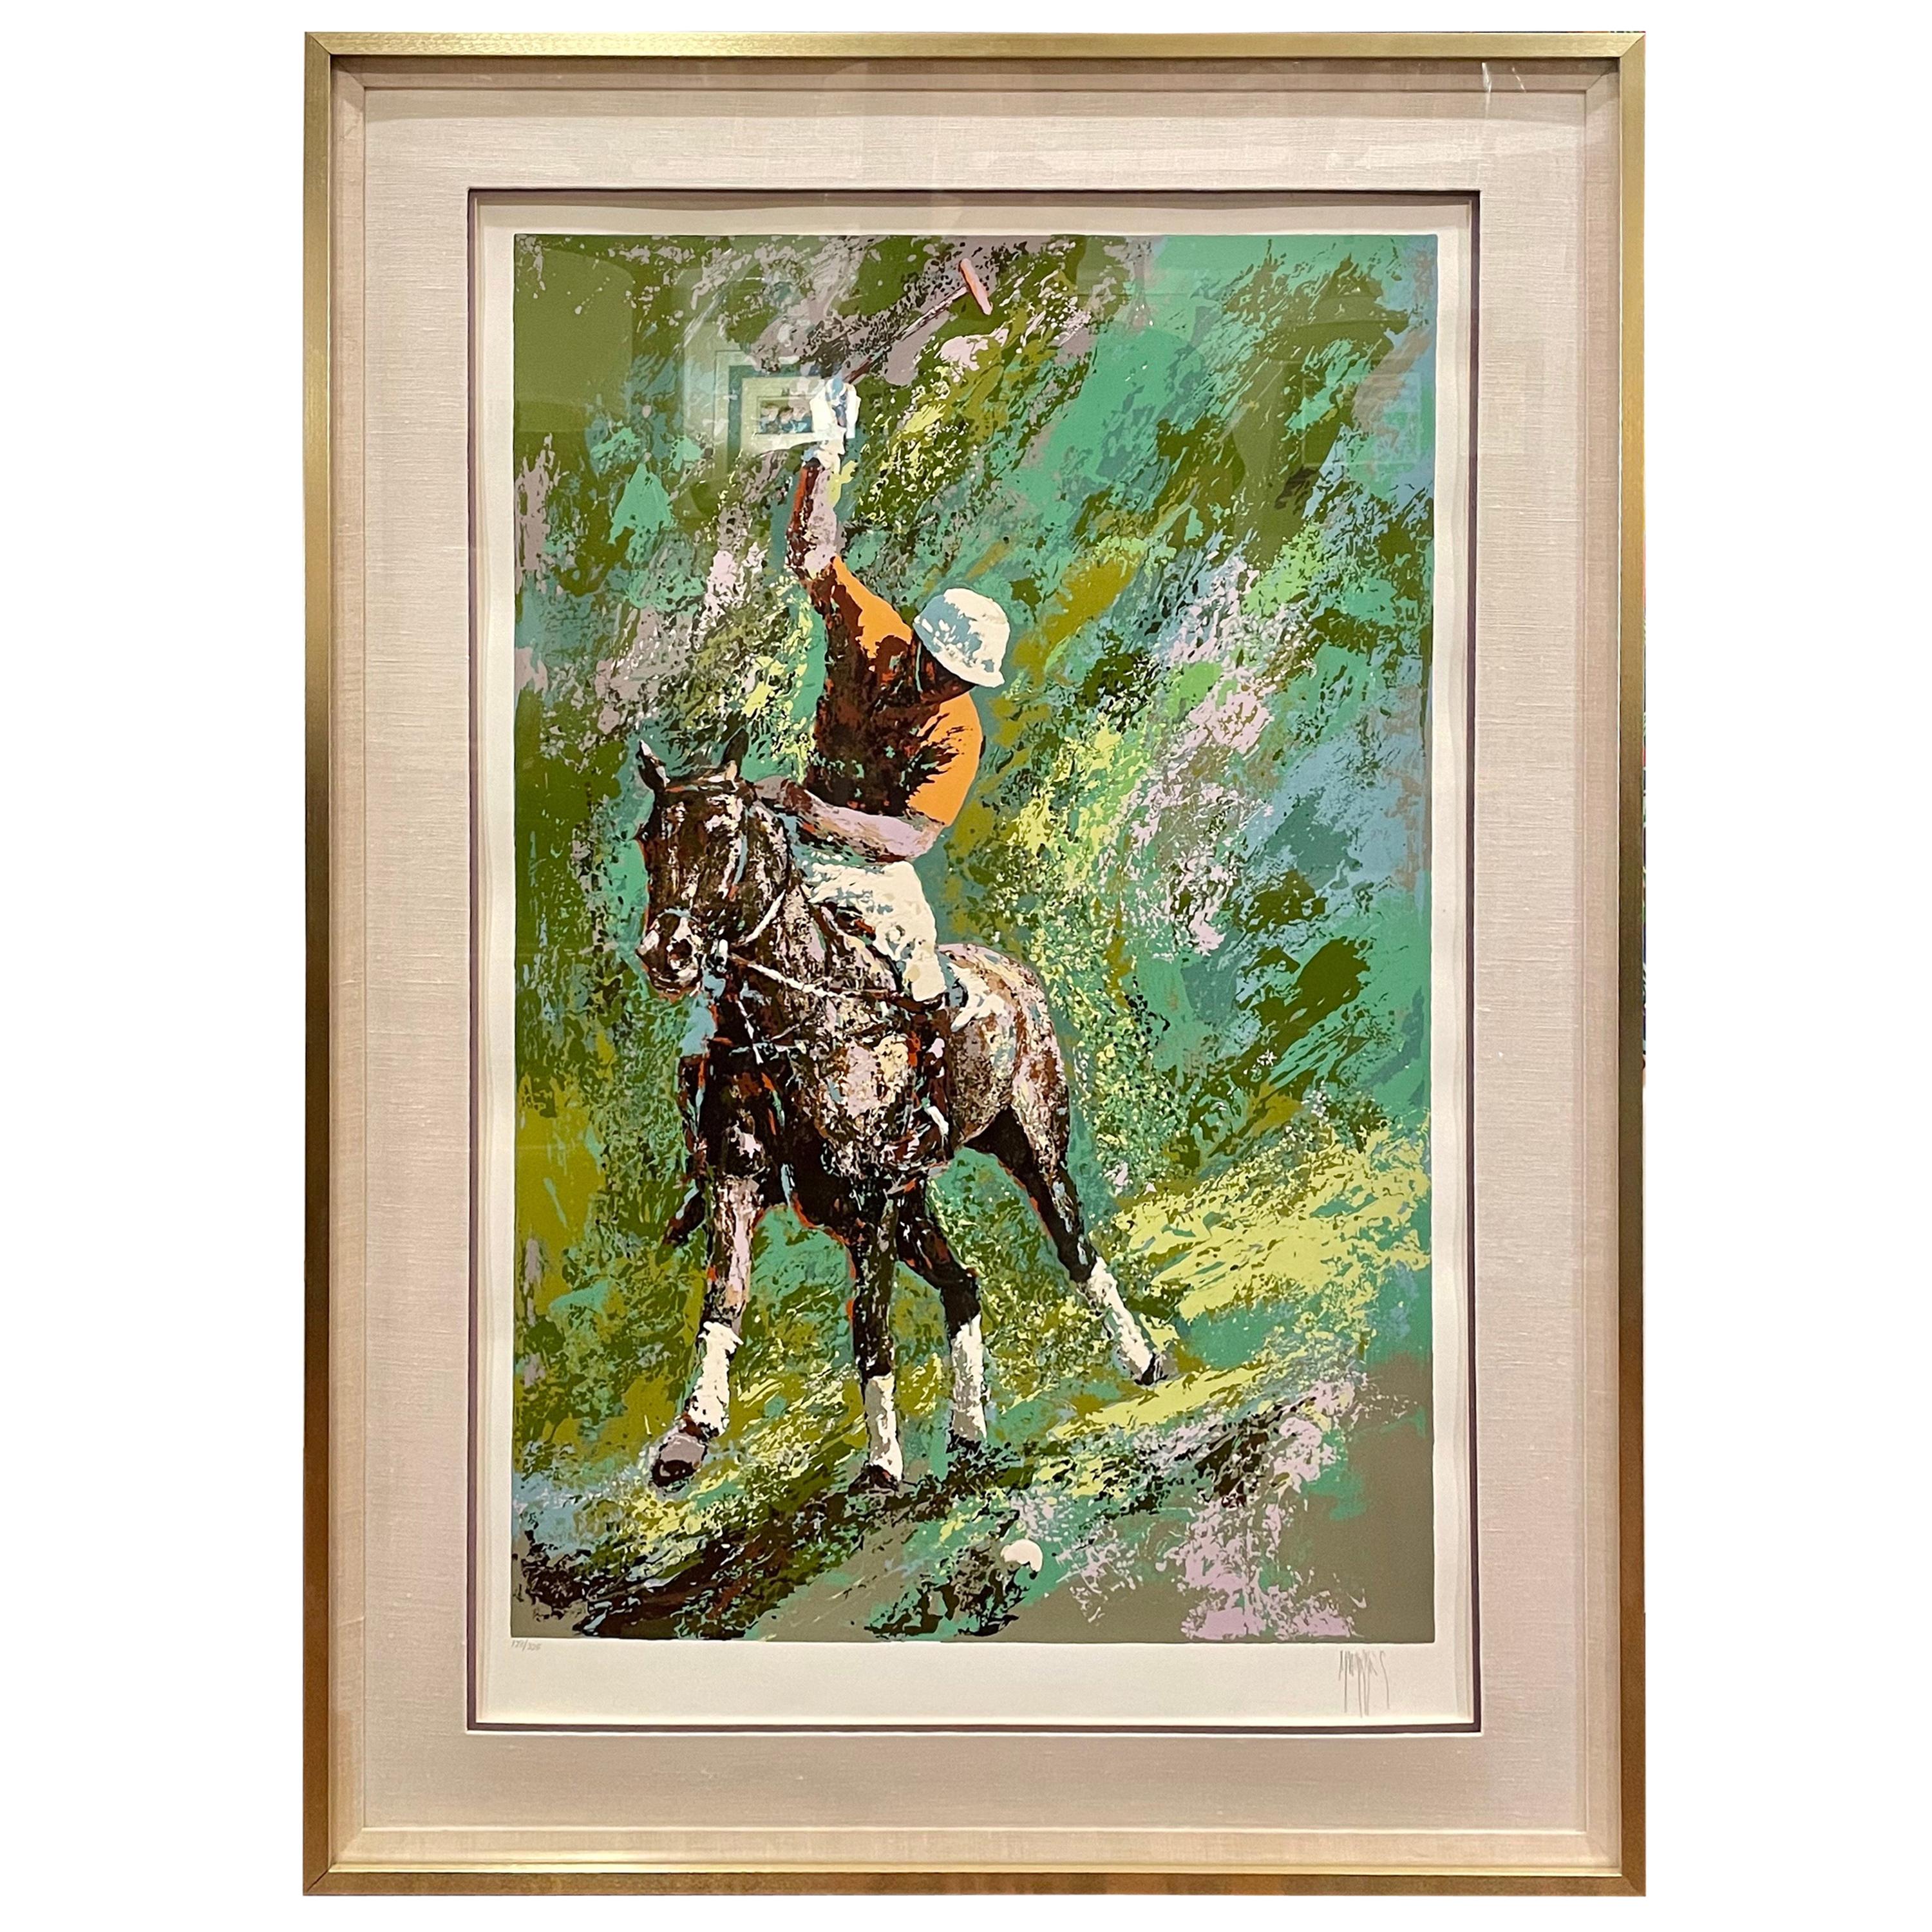 Limited Edition Serigraph Signed & Numbered Polo Player by Mark King, 1979